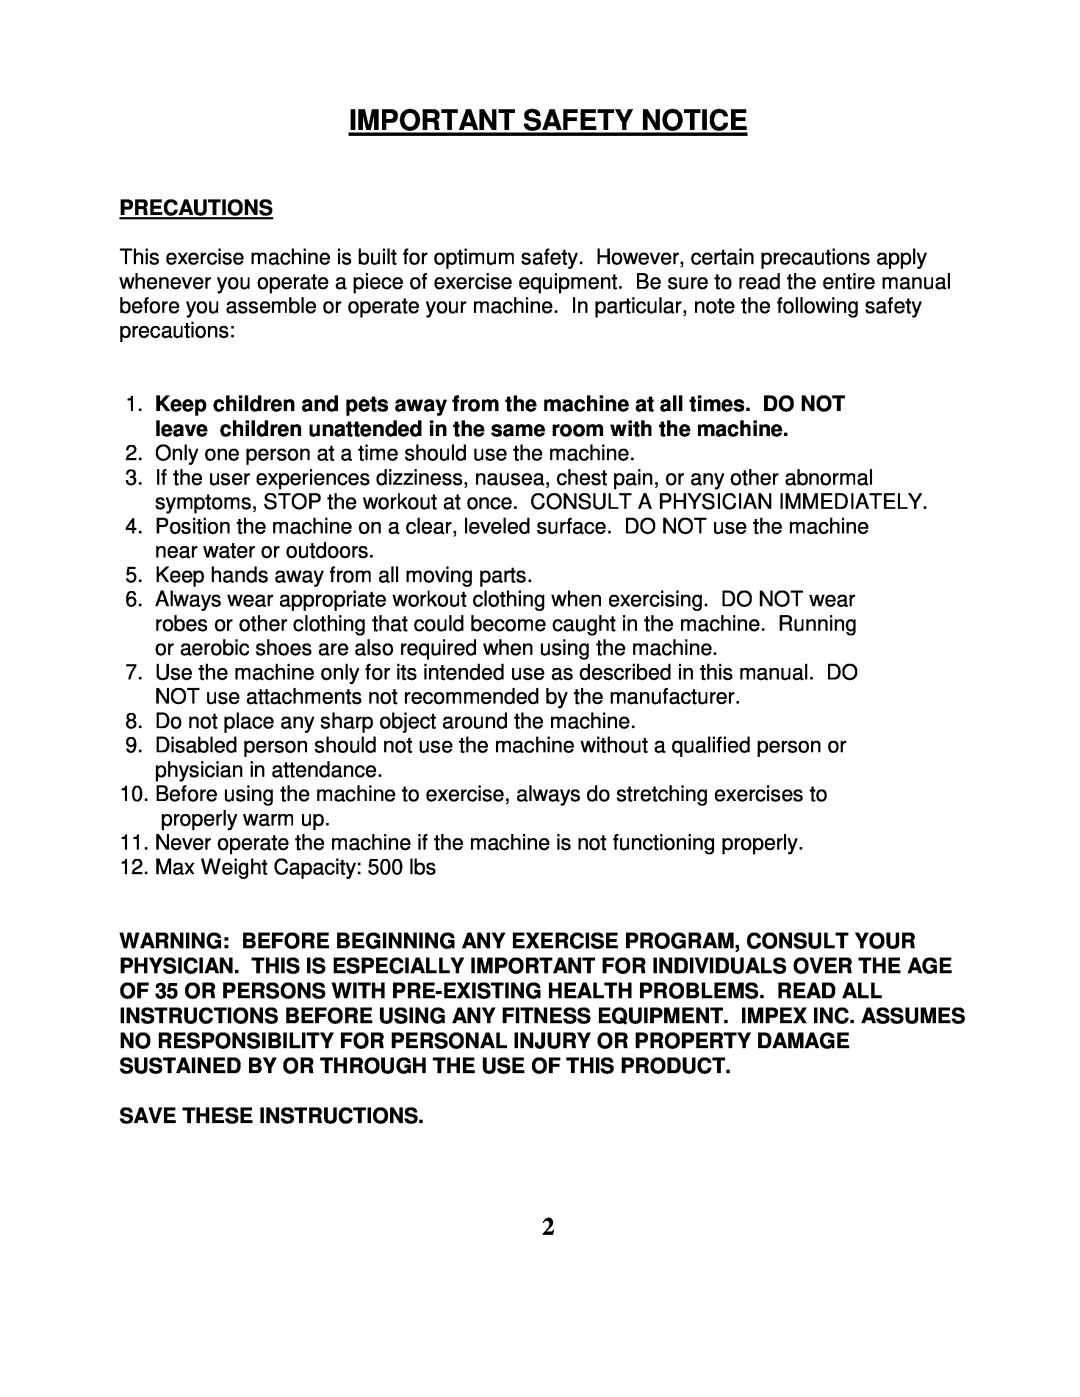 Impex PT-45 manual Important Safety Notice, Precautions, Save These Instructions 